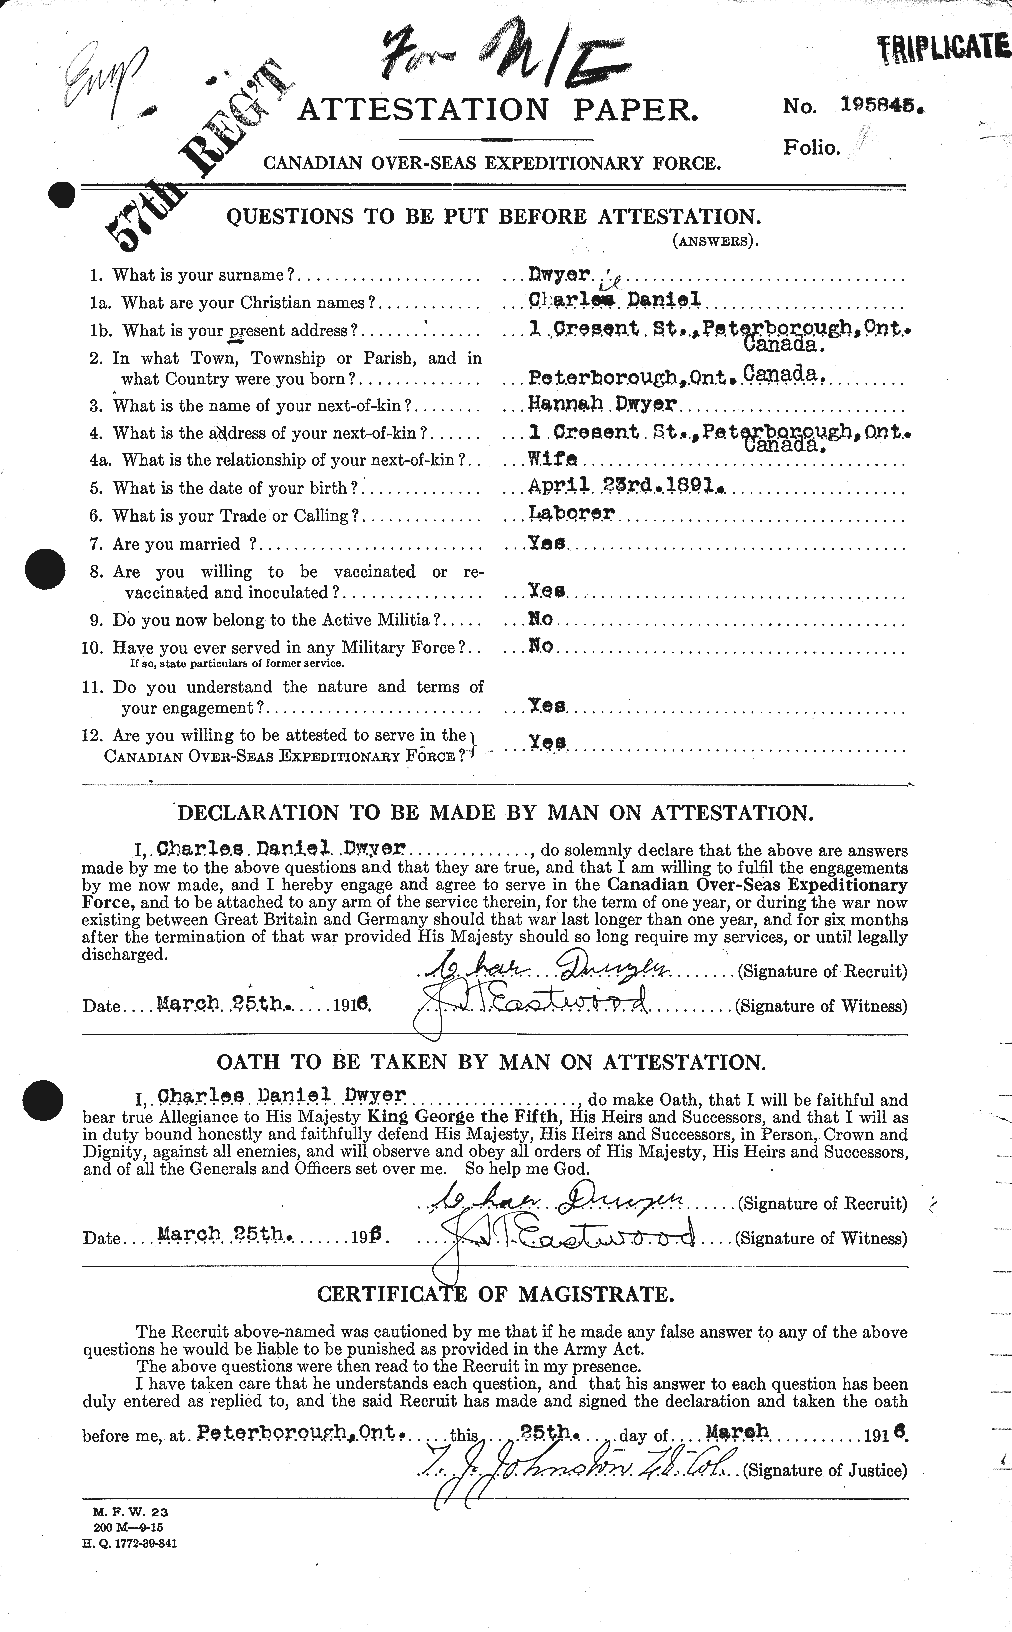 Personnel Records of the First World War - CEF 305604a